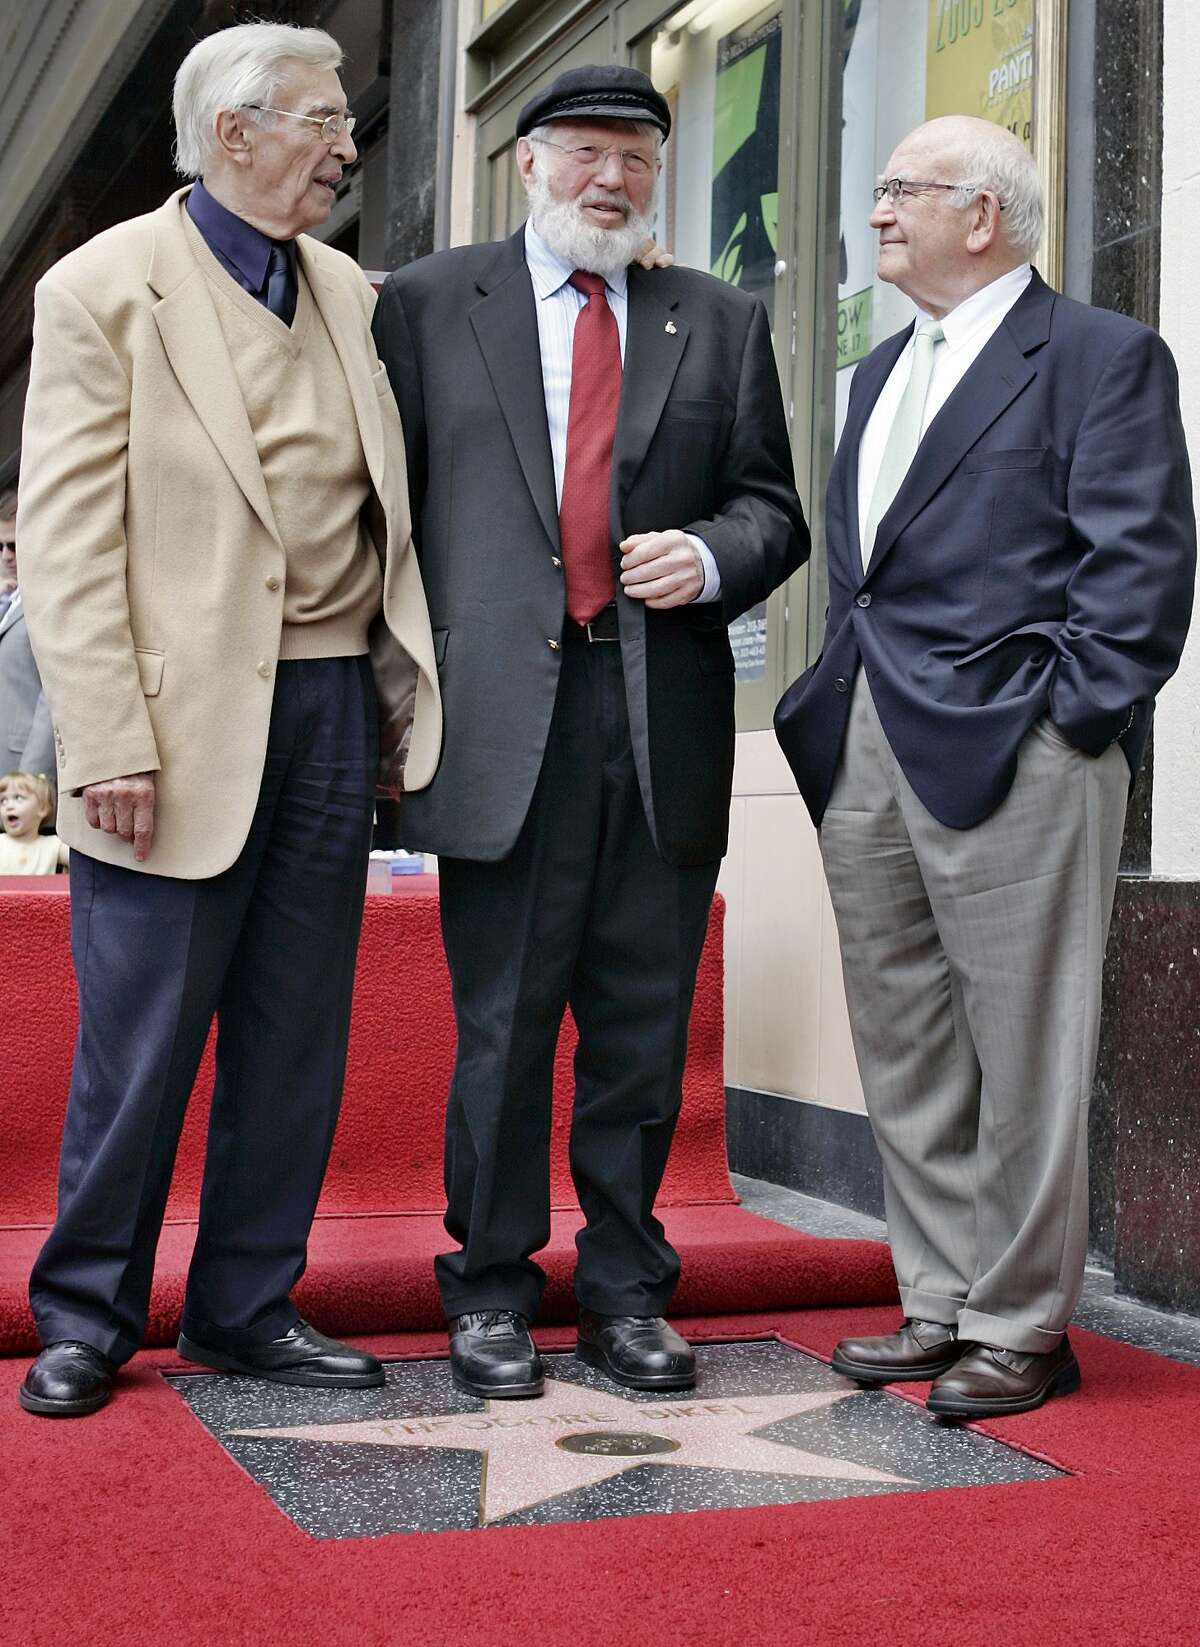 In this file photo, Theodore Bikel, center, with fellow actors Martin Landau, left, and Ed Asner, poses for photos during a dedication ceremony for Bikel’s star on the Hollywood Walk of Fame in Los Angeles. Bikel, the Tony- and Oscar-nominated actor and singer whose passions included folk music and political activism, died Tuesday morning of natural causes at UCLA Medical Center in Los Angeles, said his agent Robert Malcolm. He was 91.